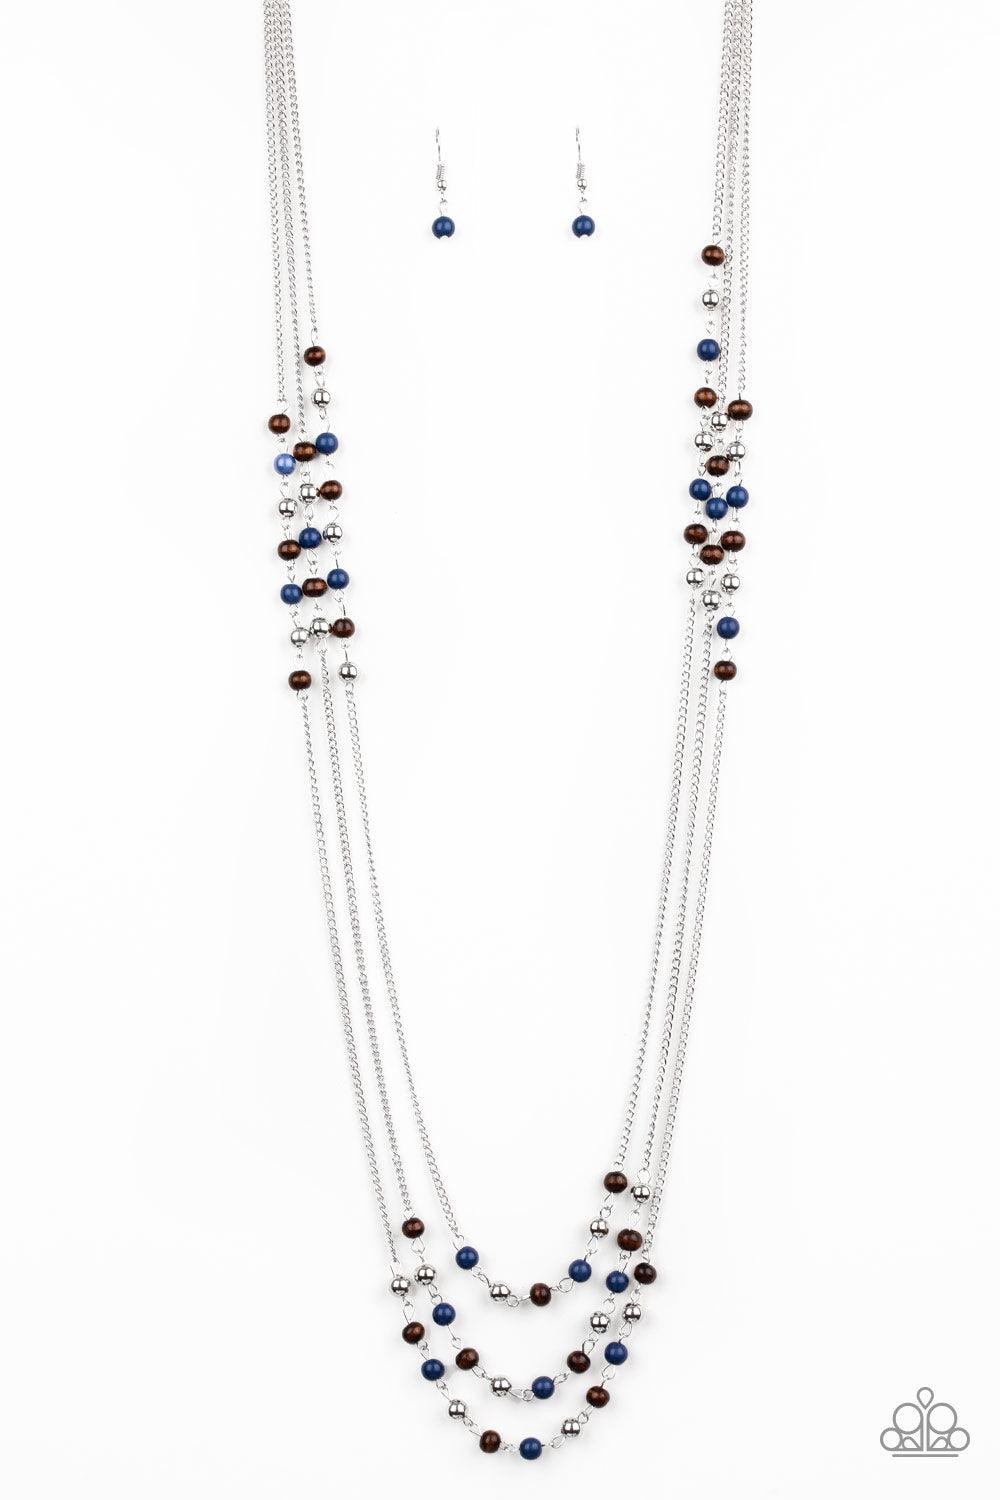 Paparazzi Accessories Seasonal Sensation - Blue Dainty silver, blue, and wooden beads trickle along three shimmery silver chains, creating colorful layers across the chest. Features an adjustable clasp closure. Sold as one individual necklace. Includes on